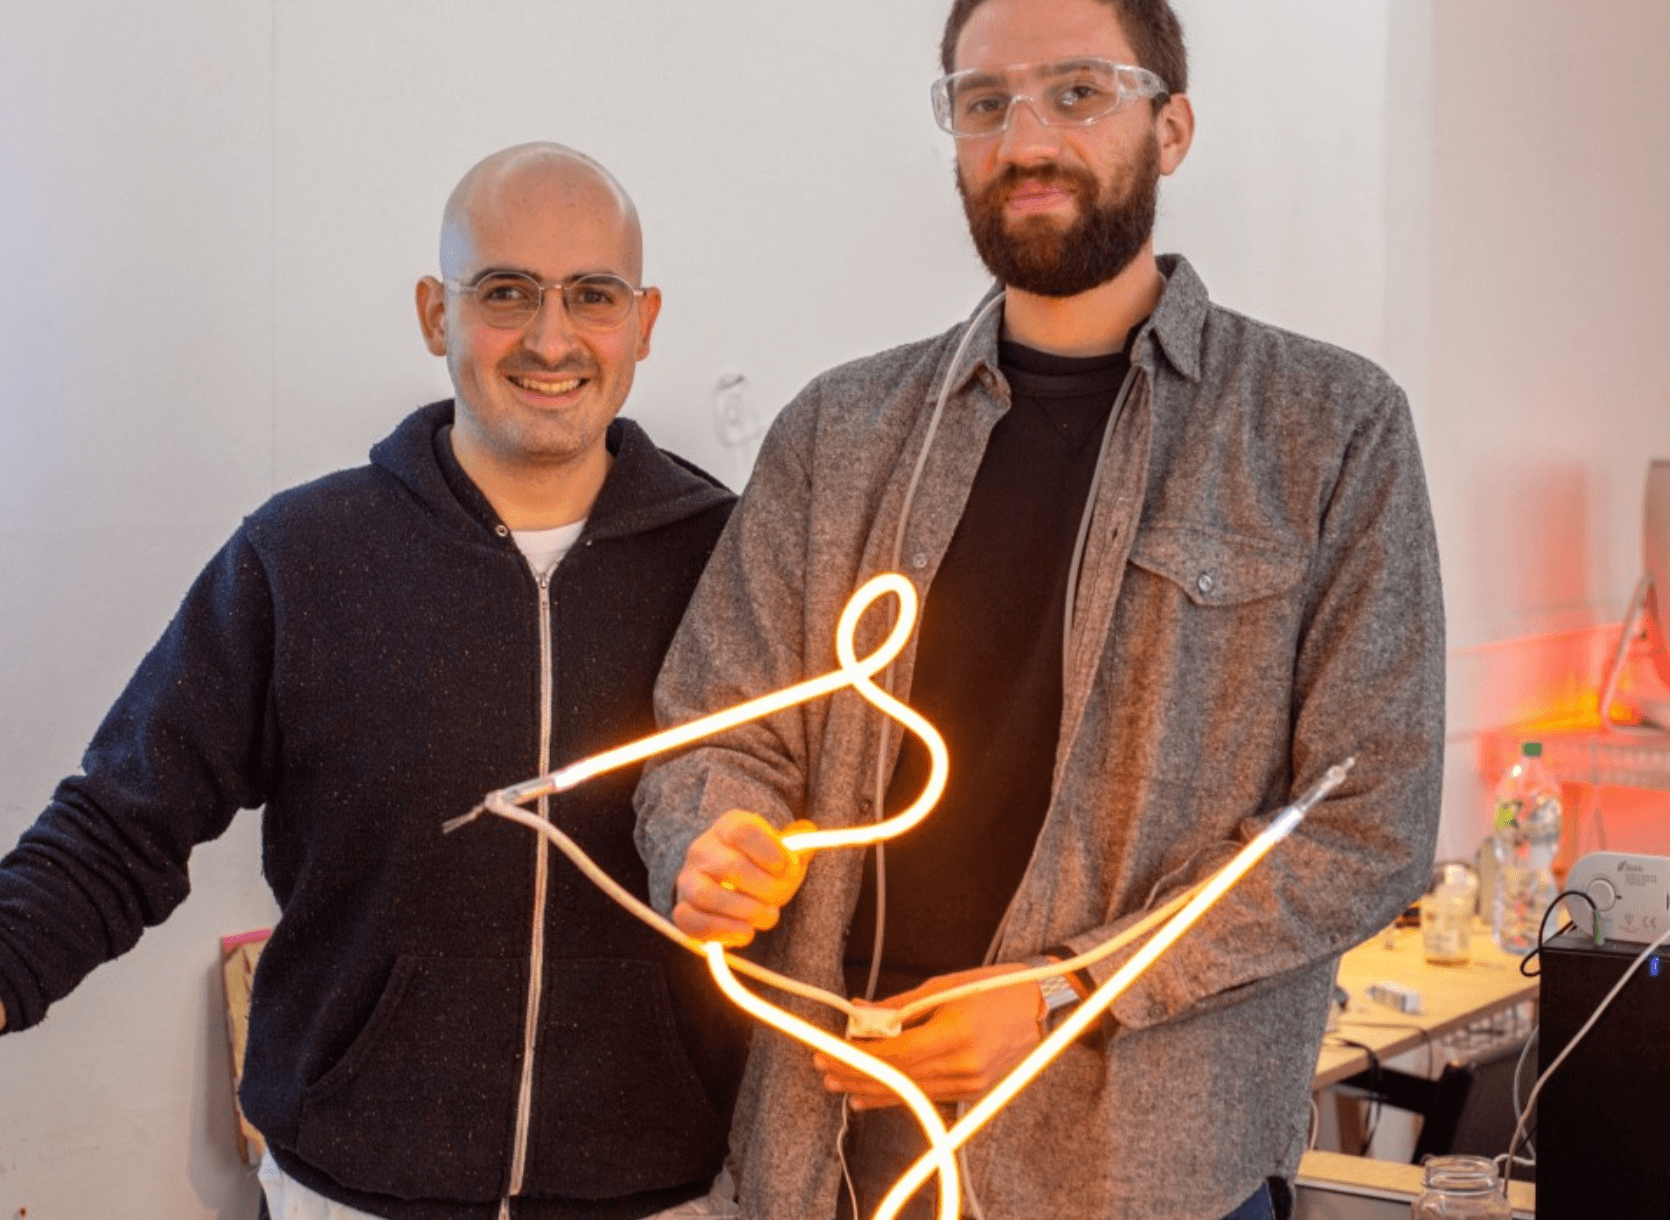 CHALLENGE YOURSELF WITH NEON-MAKING